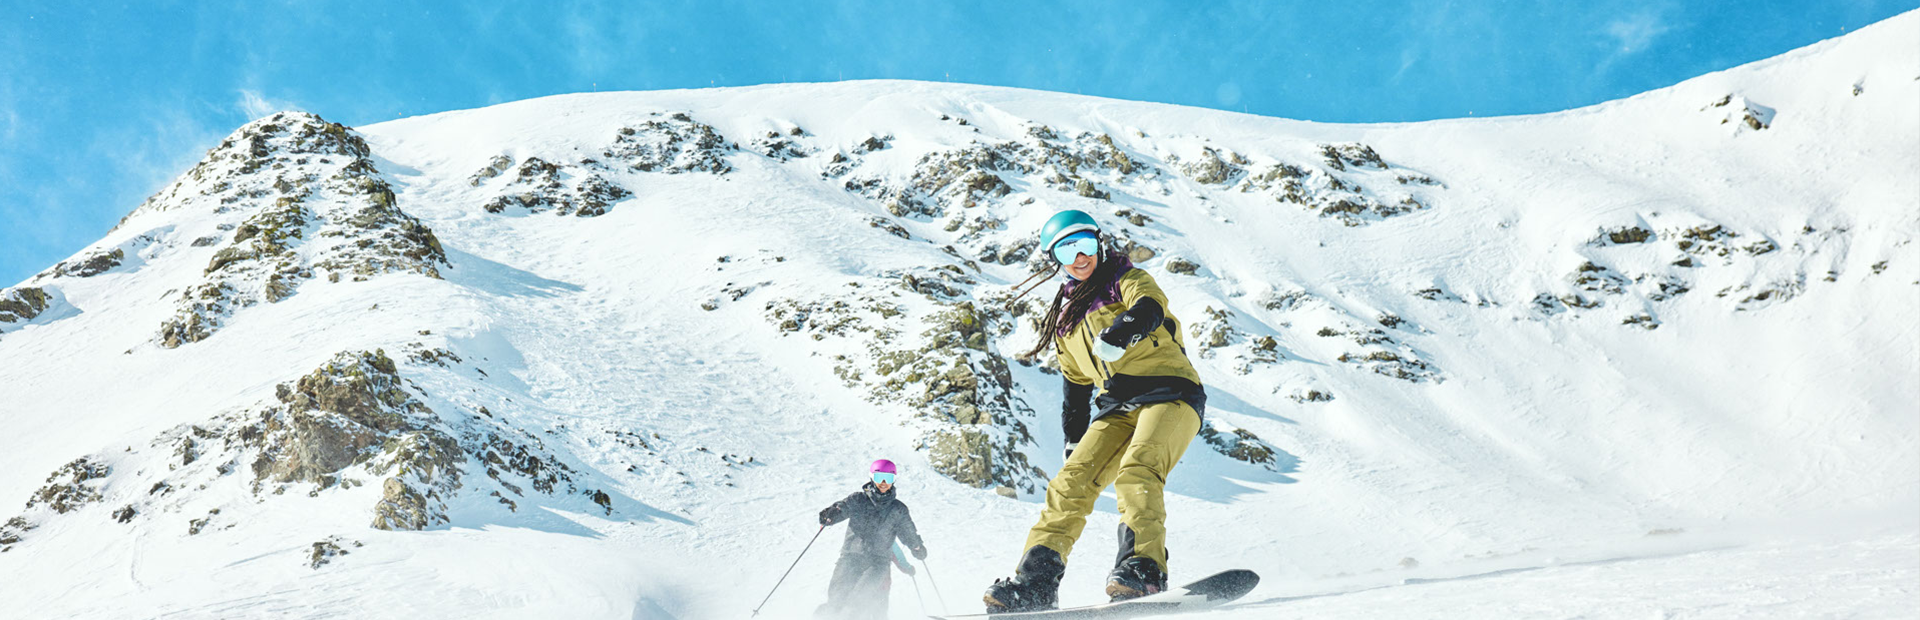 Girl snowboarding in front of a person skiing on snowy mountain